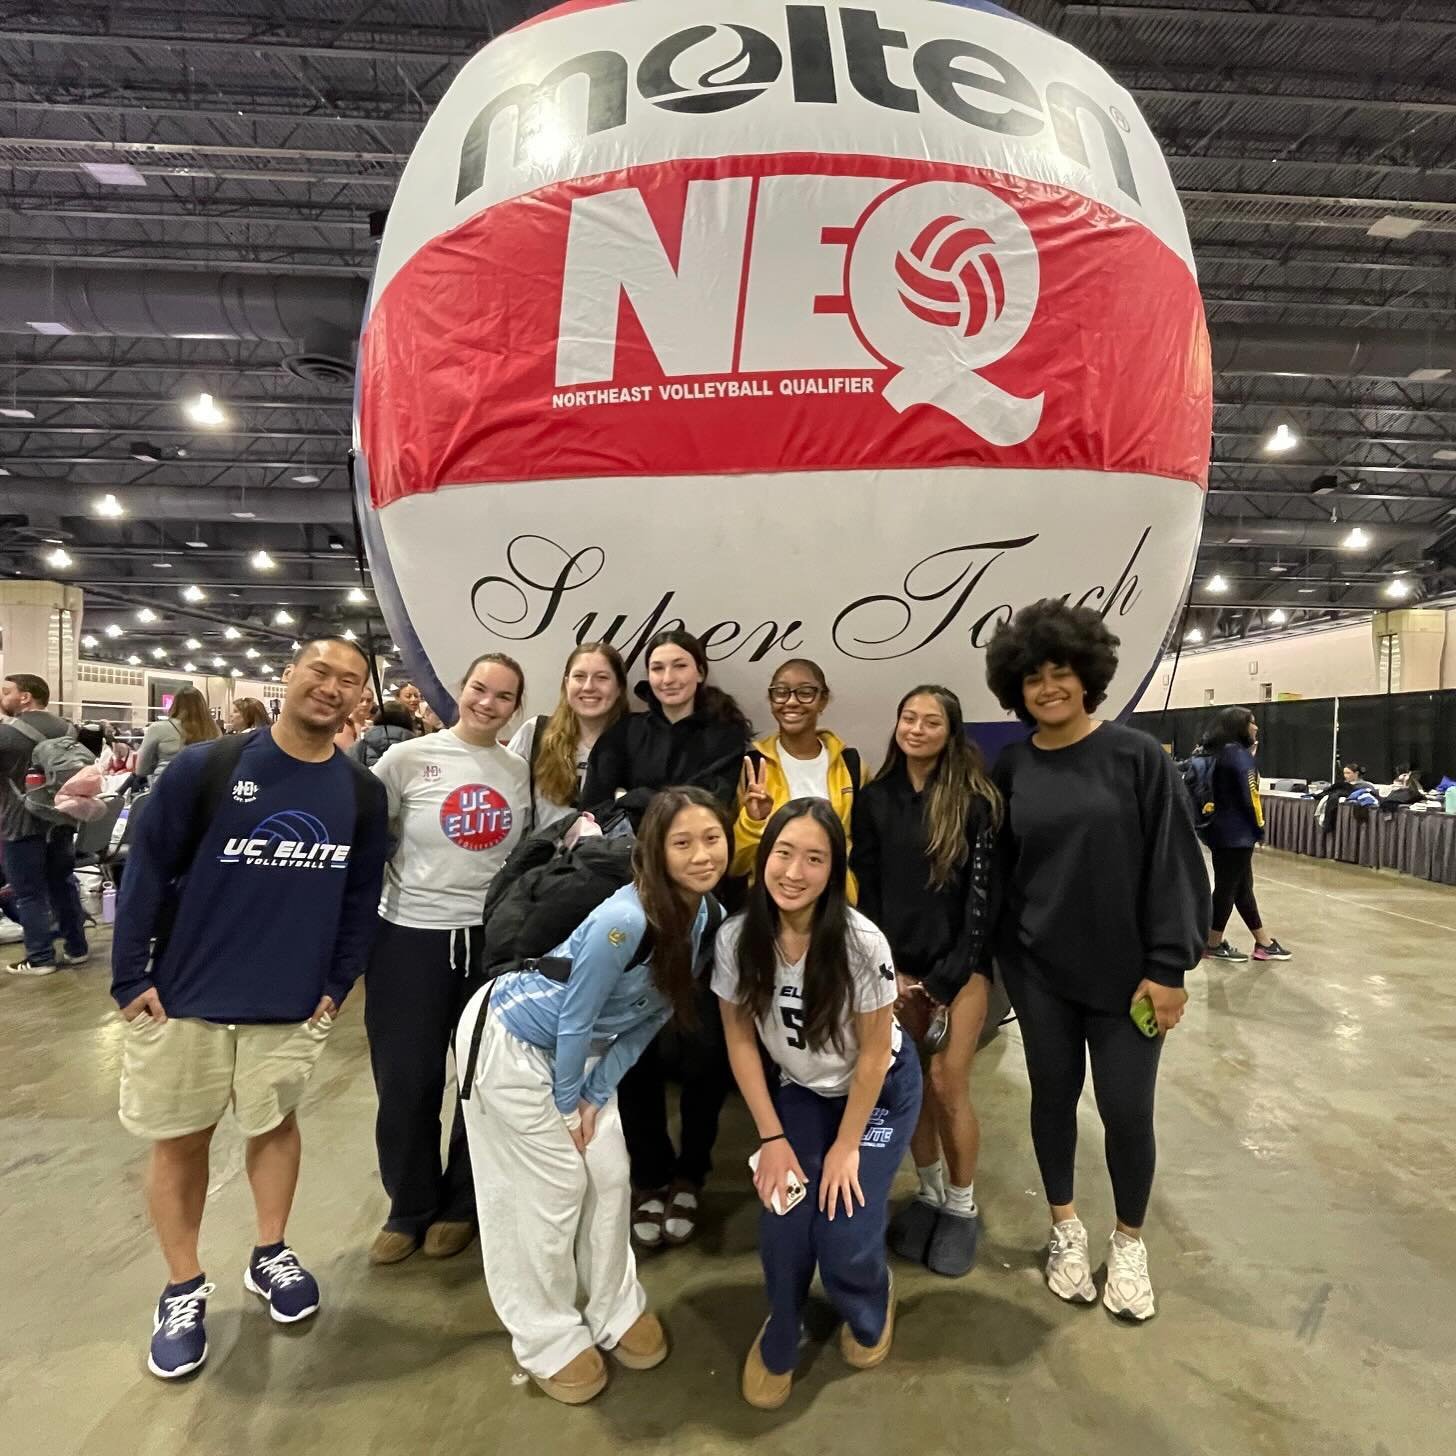 Great job to 17 Vivian for competing at the 2024 NEQ this past weekend! #ucelitevbc #ucelite